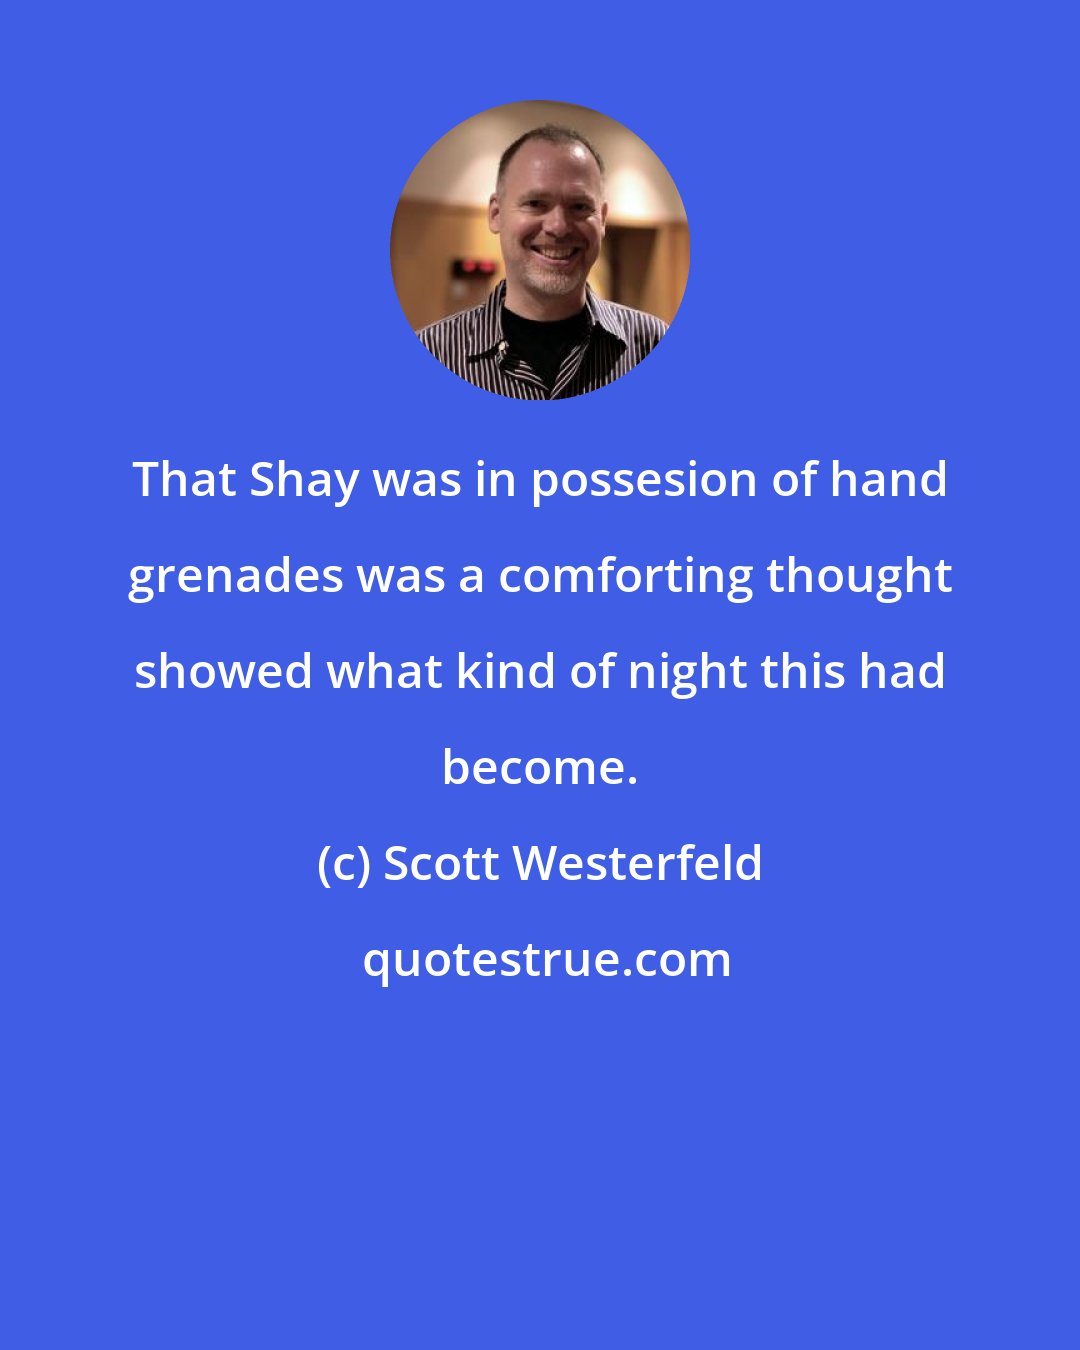 Scott Westerfeld: That Shay was in possesion of hand grenades was a comforting thought showed what kind of night this had become.